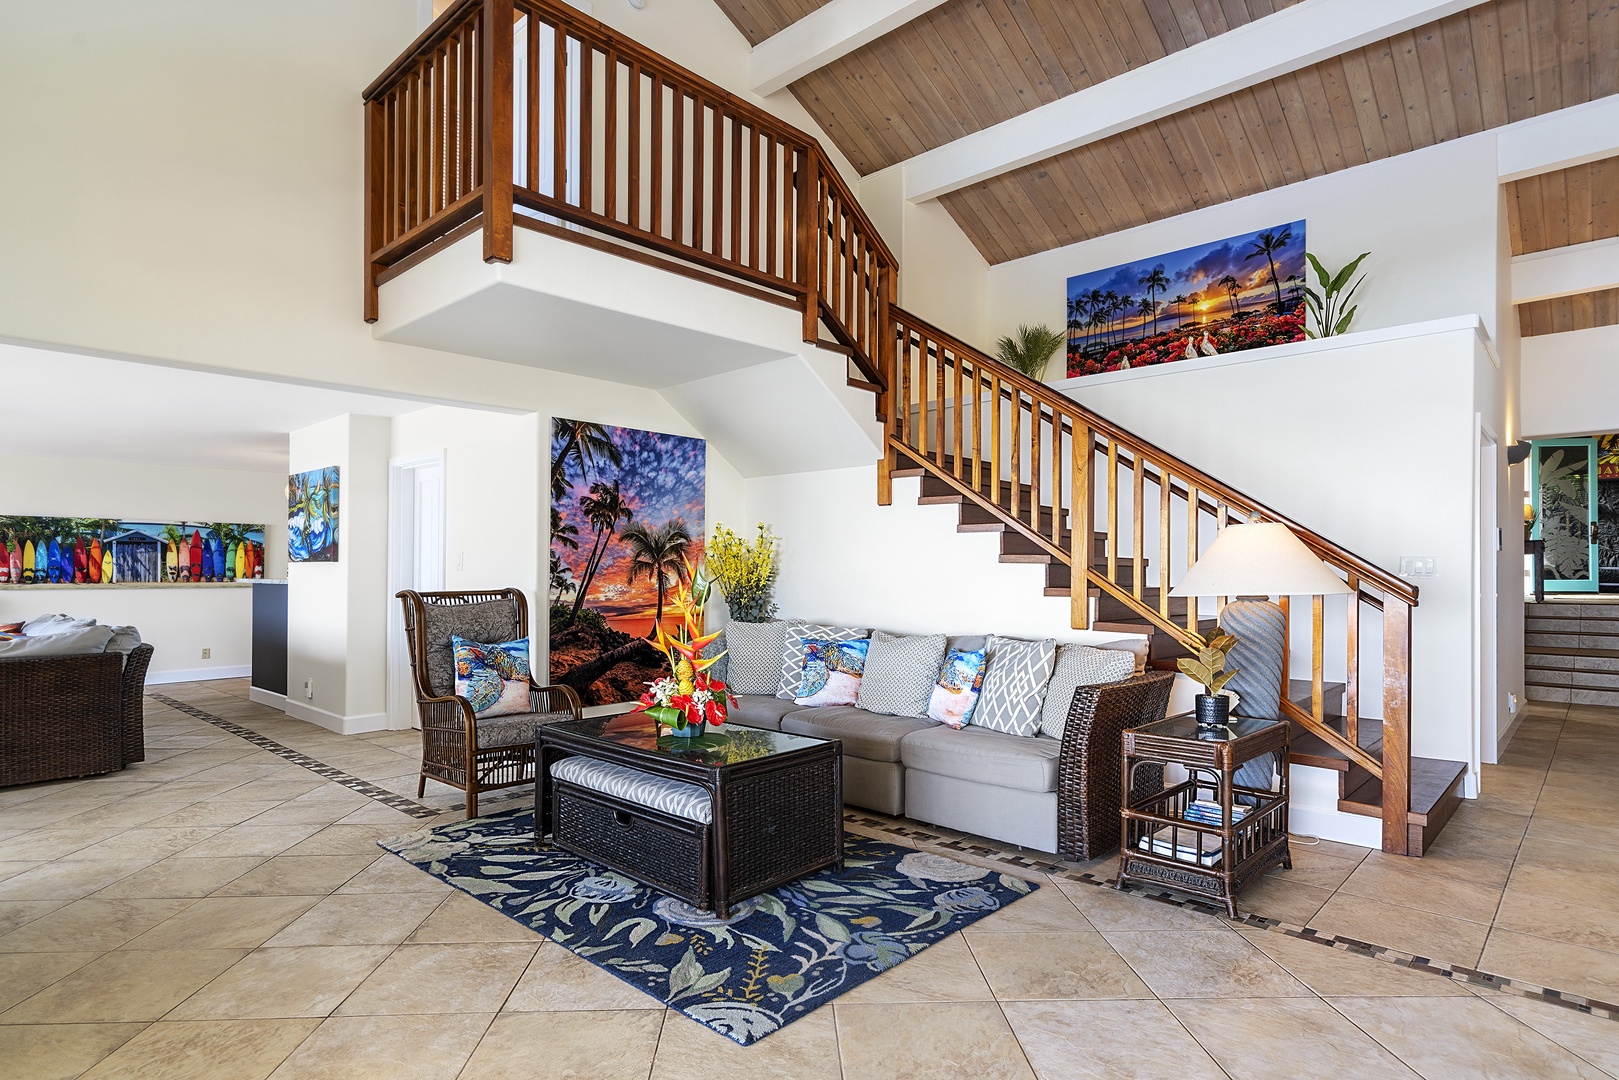 Kailua Kona Vacation Rentals, Hale Pua - Peaceful reading nook below the stairs to the Primary bedroom